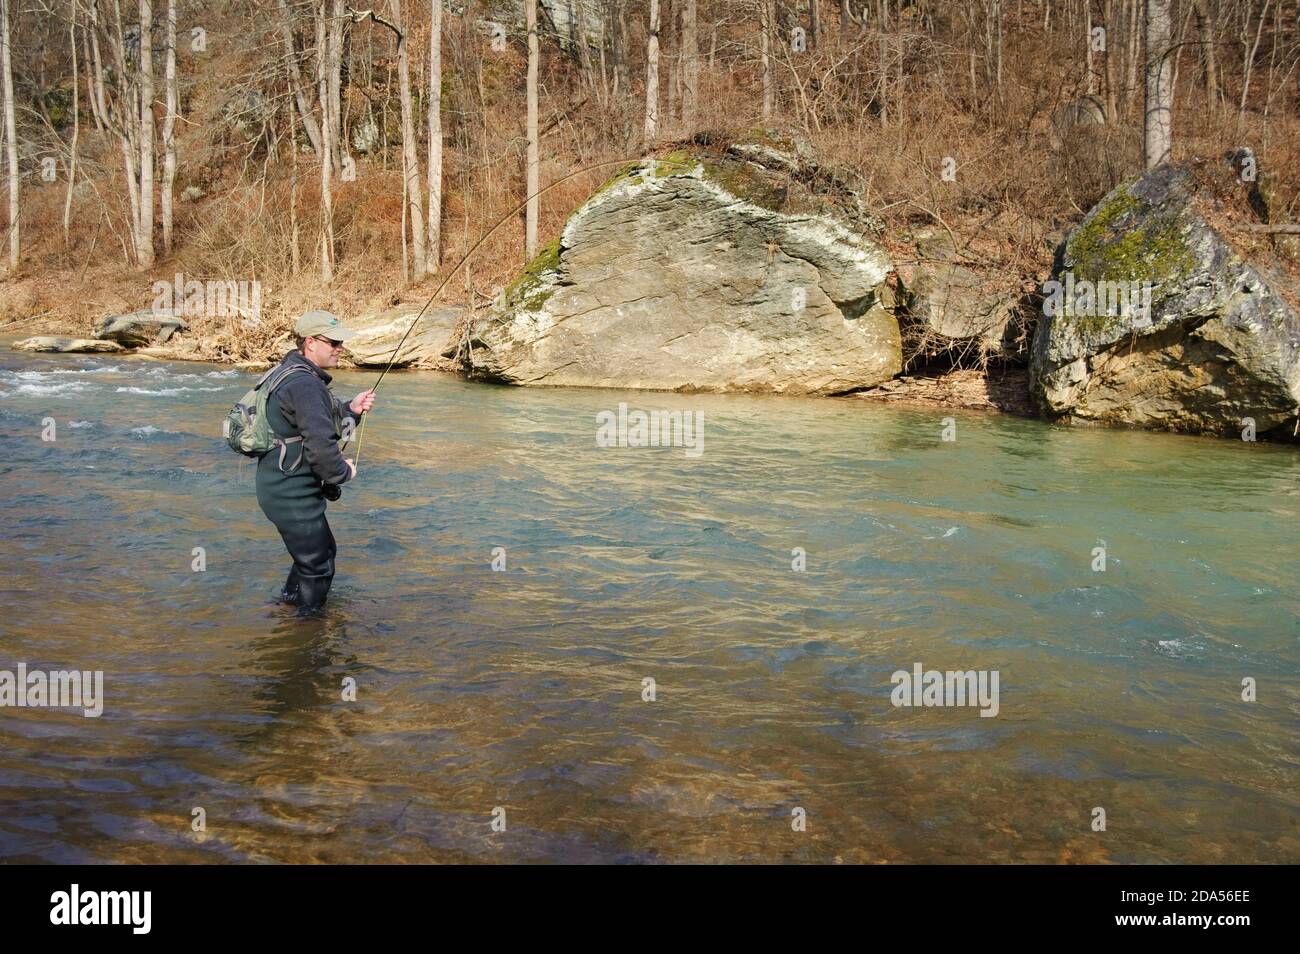 WINTER FLY FISHING FIGHTING A FISH Stock Photo